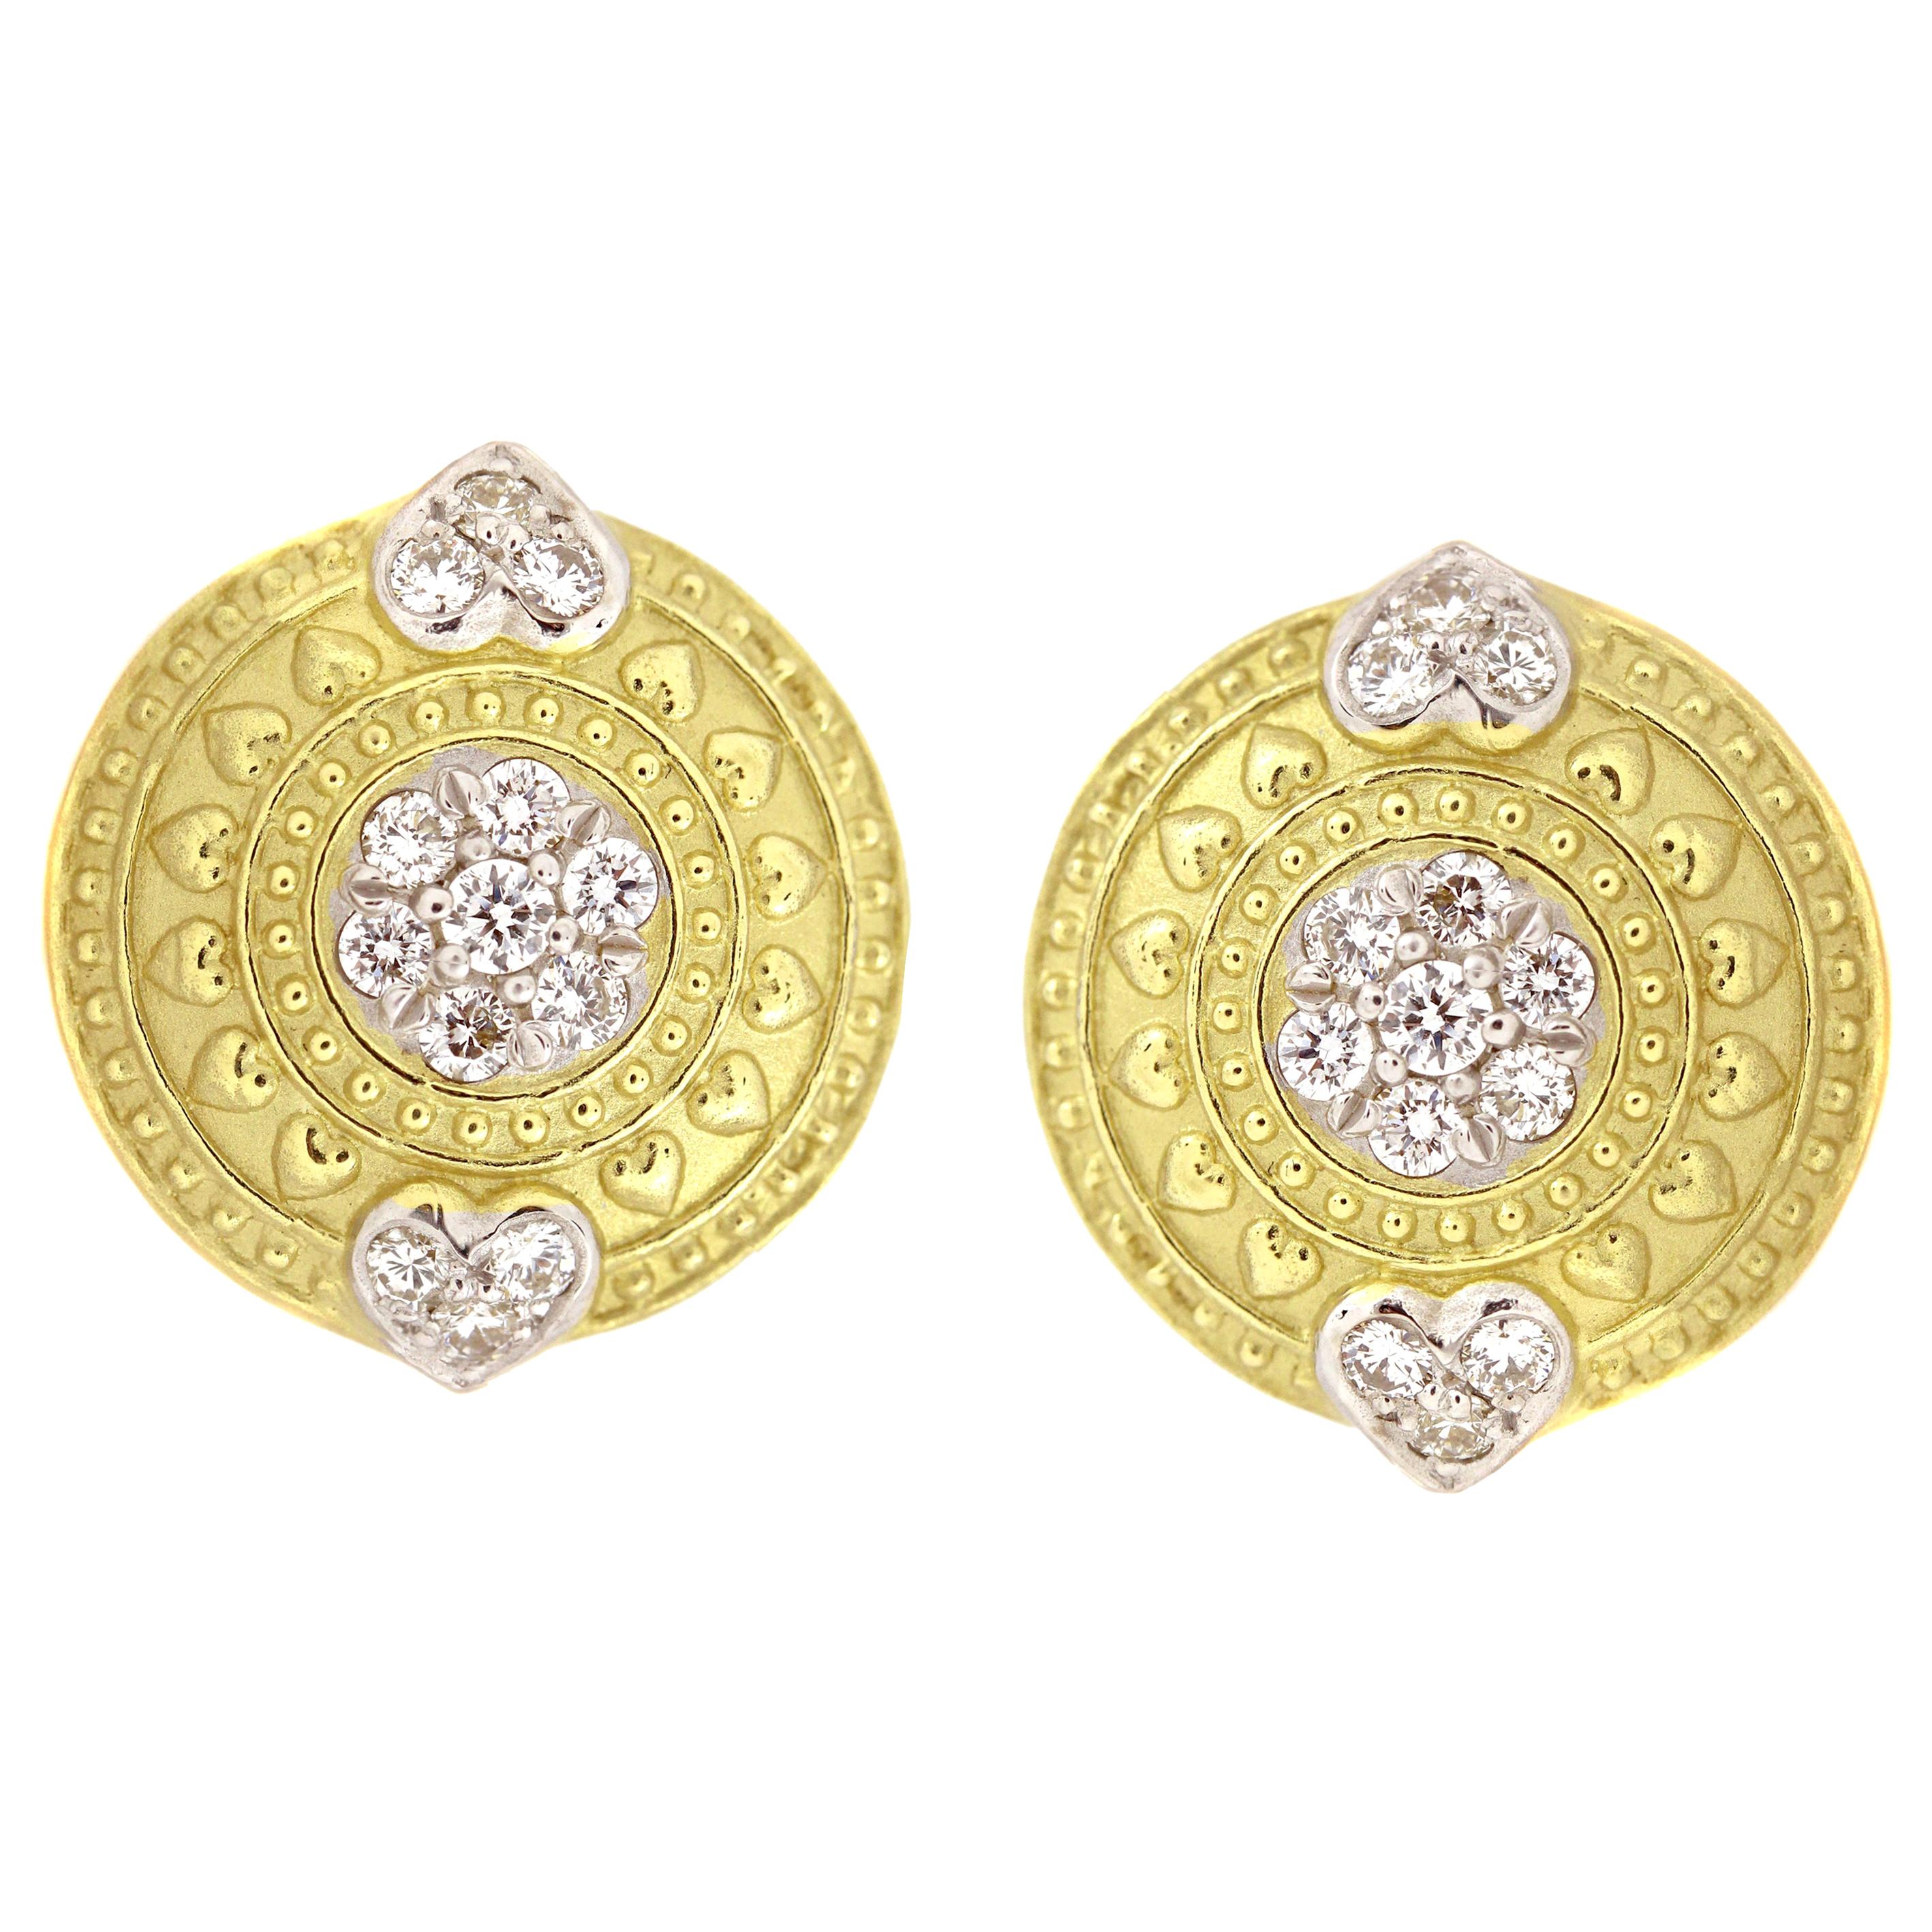 Stambolian 18K Gold and Diamond Circle Earrings with Hearts